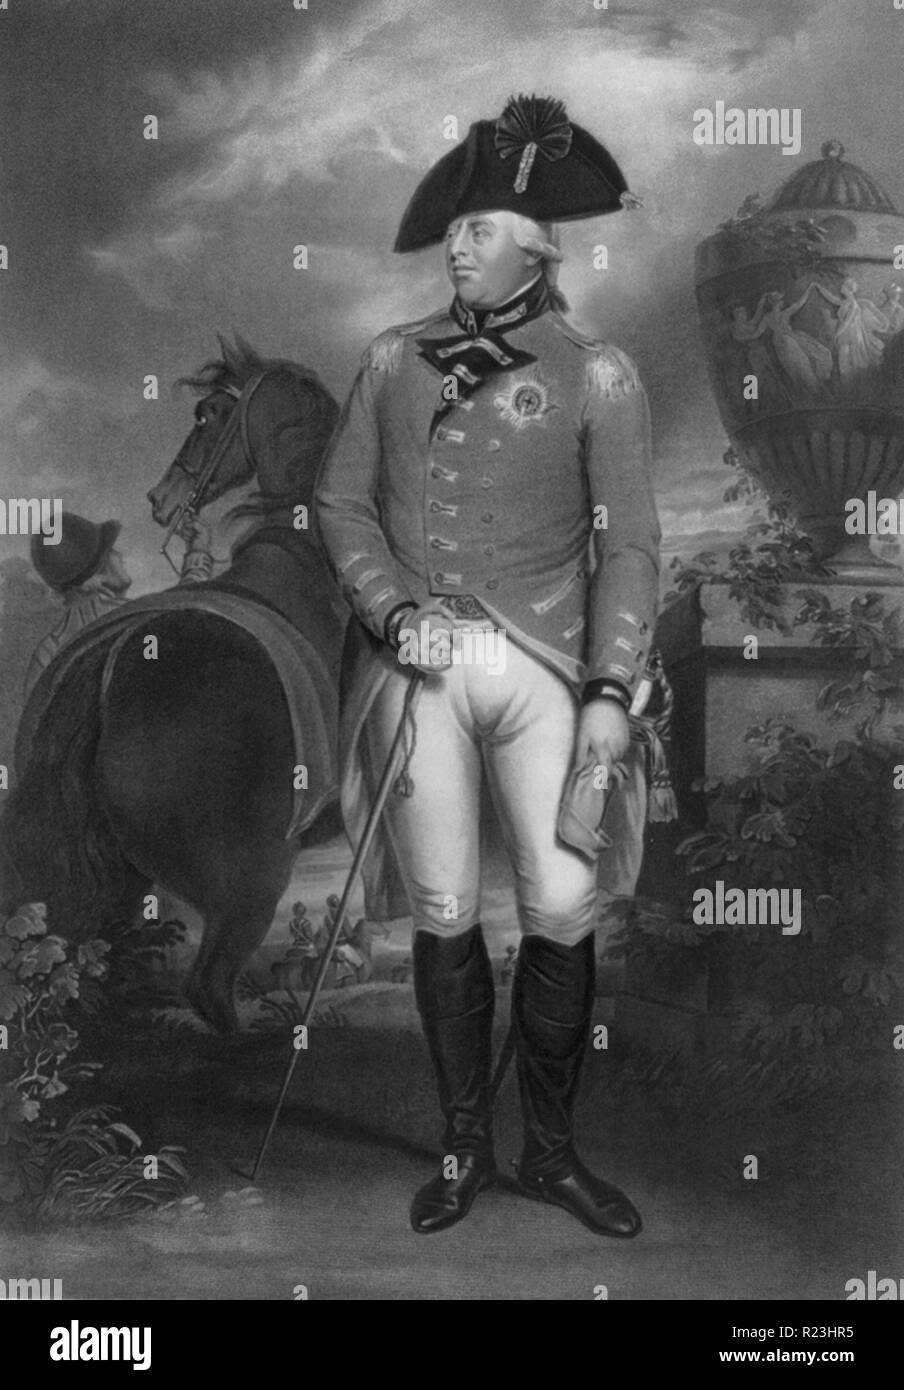 His most gracious majesty King George the Third. Painted by Sr. Wm. Beechey R.A. King George III was King of the United Kingdom of Great Britain and Ireland. He was concurrently Duke and prince-elector of Brunswick-Luneburg ('Hanover') in the Holy Roman Empire until his promotion to King of Hanover in 1814. He was the third British monarch of the House of Hanover, but spoke English as his first language, and never visited Hanover. Stock Photo